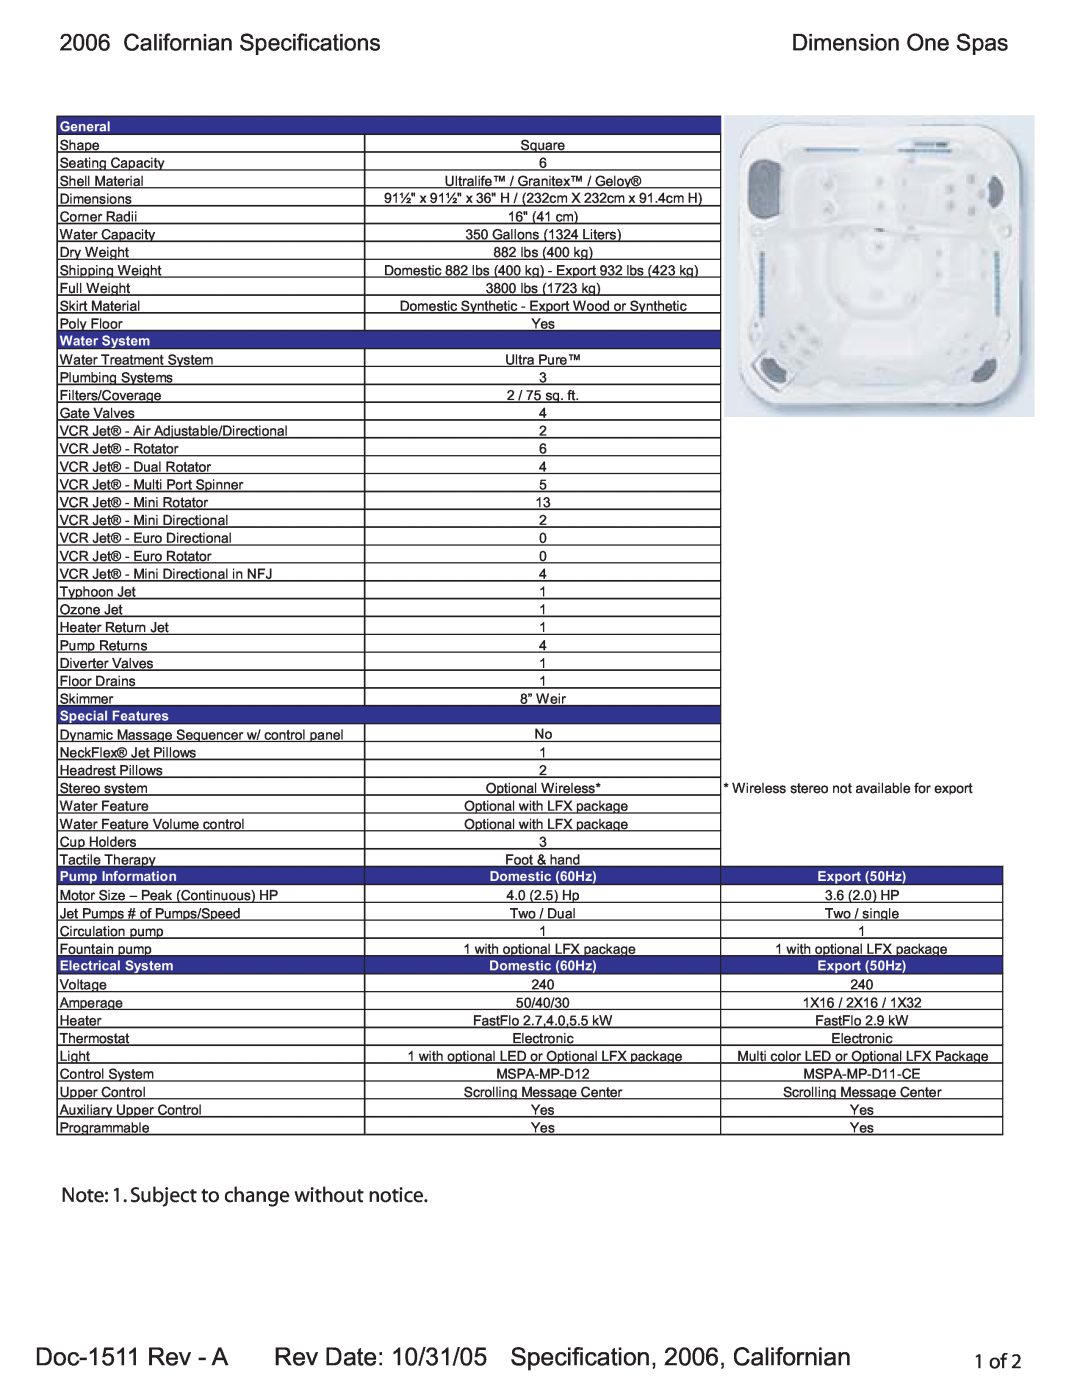 Dimension One Spas Californian specifications Doc-1511Rev - A, 1 of, General, Water System, Special Features, Export 50Hz 